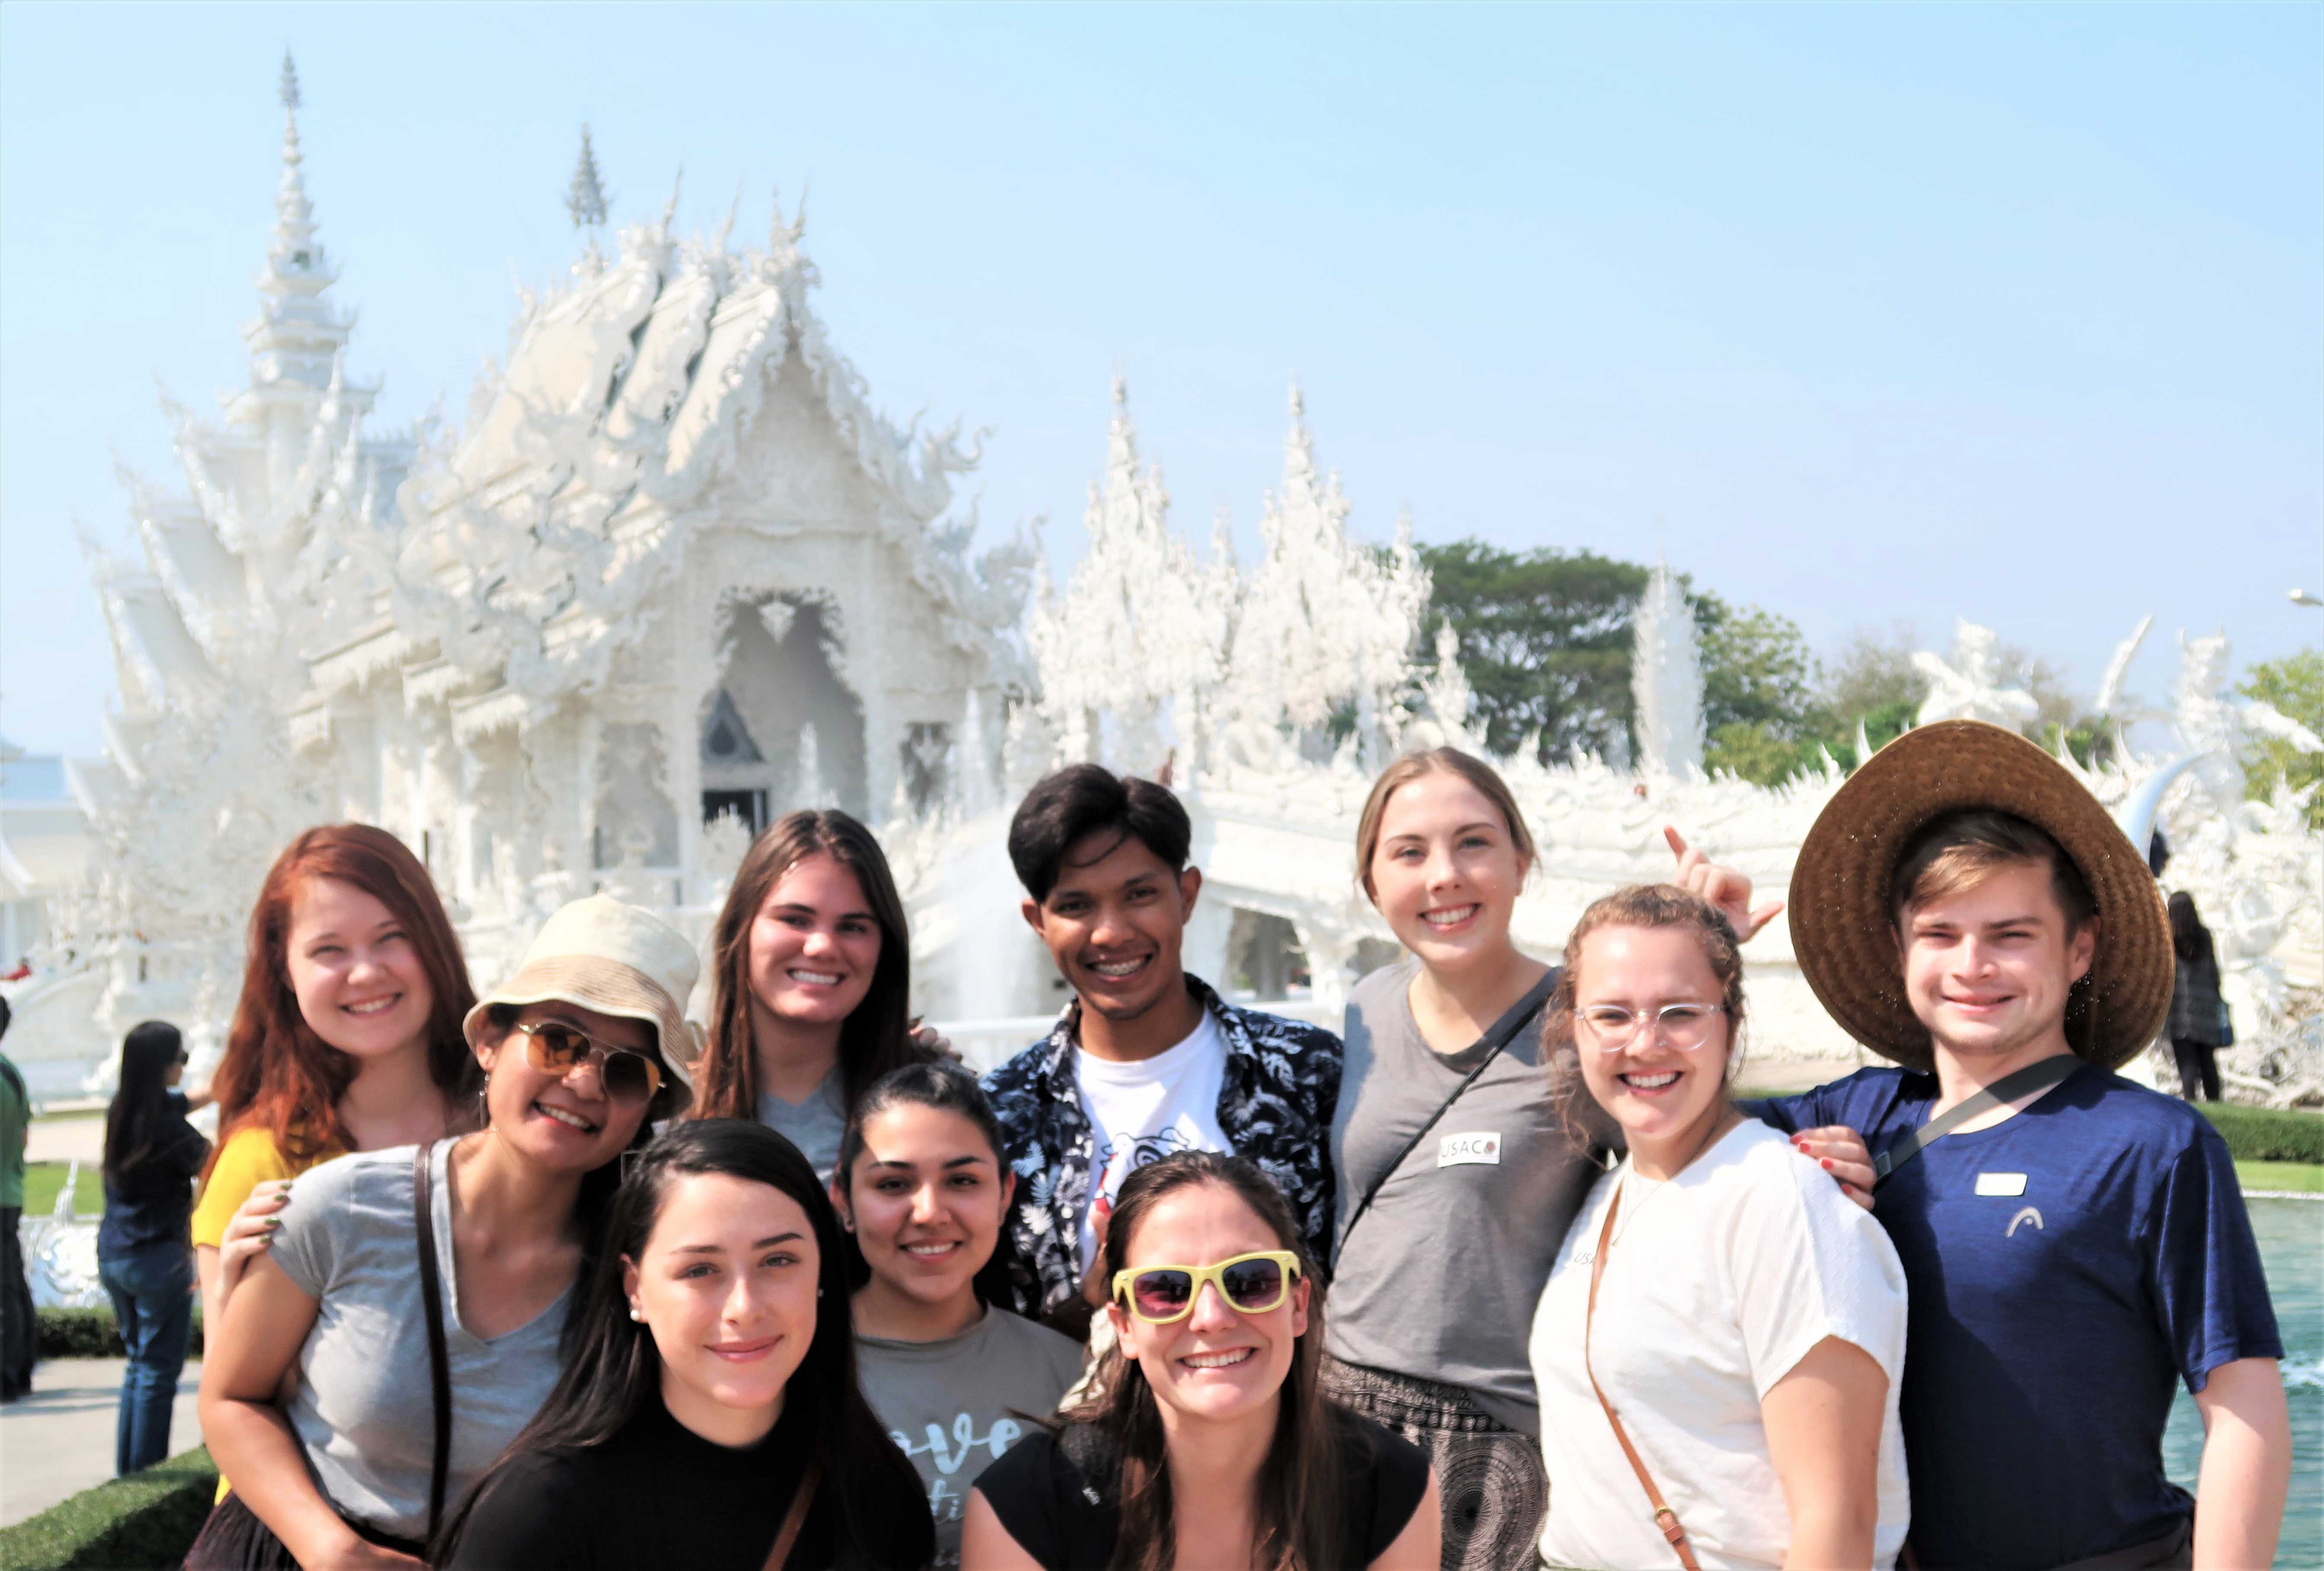 Students in front the famous white temple in Chiang Rai, Thailand.